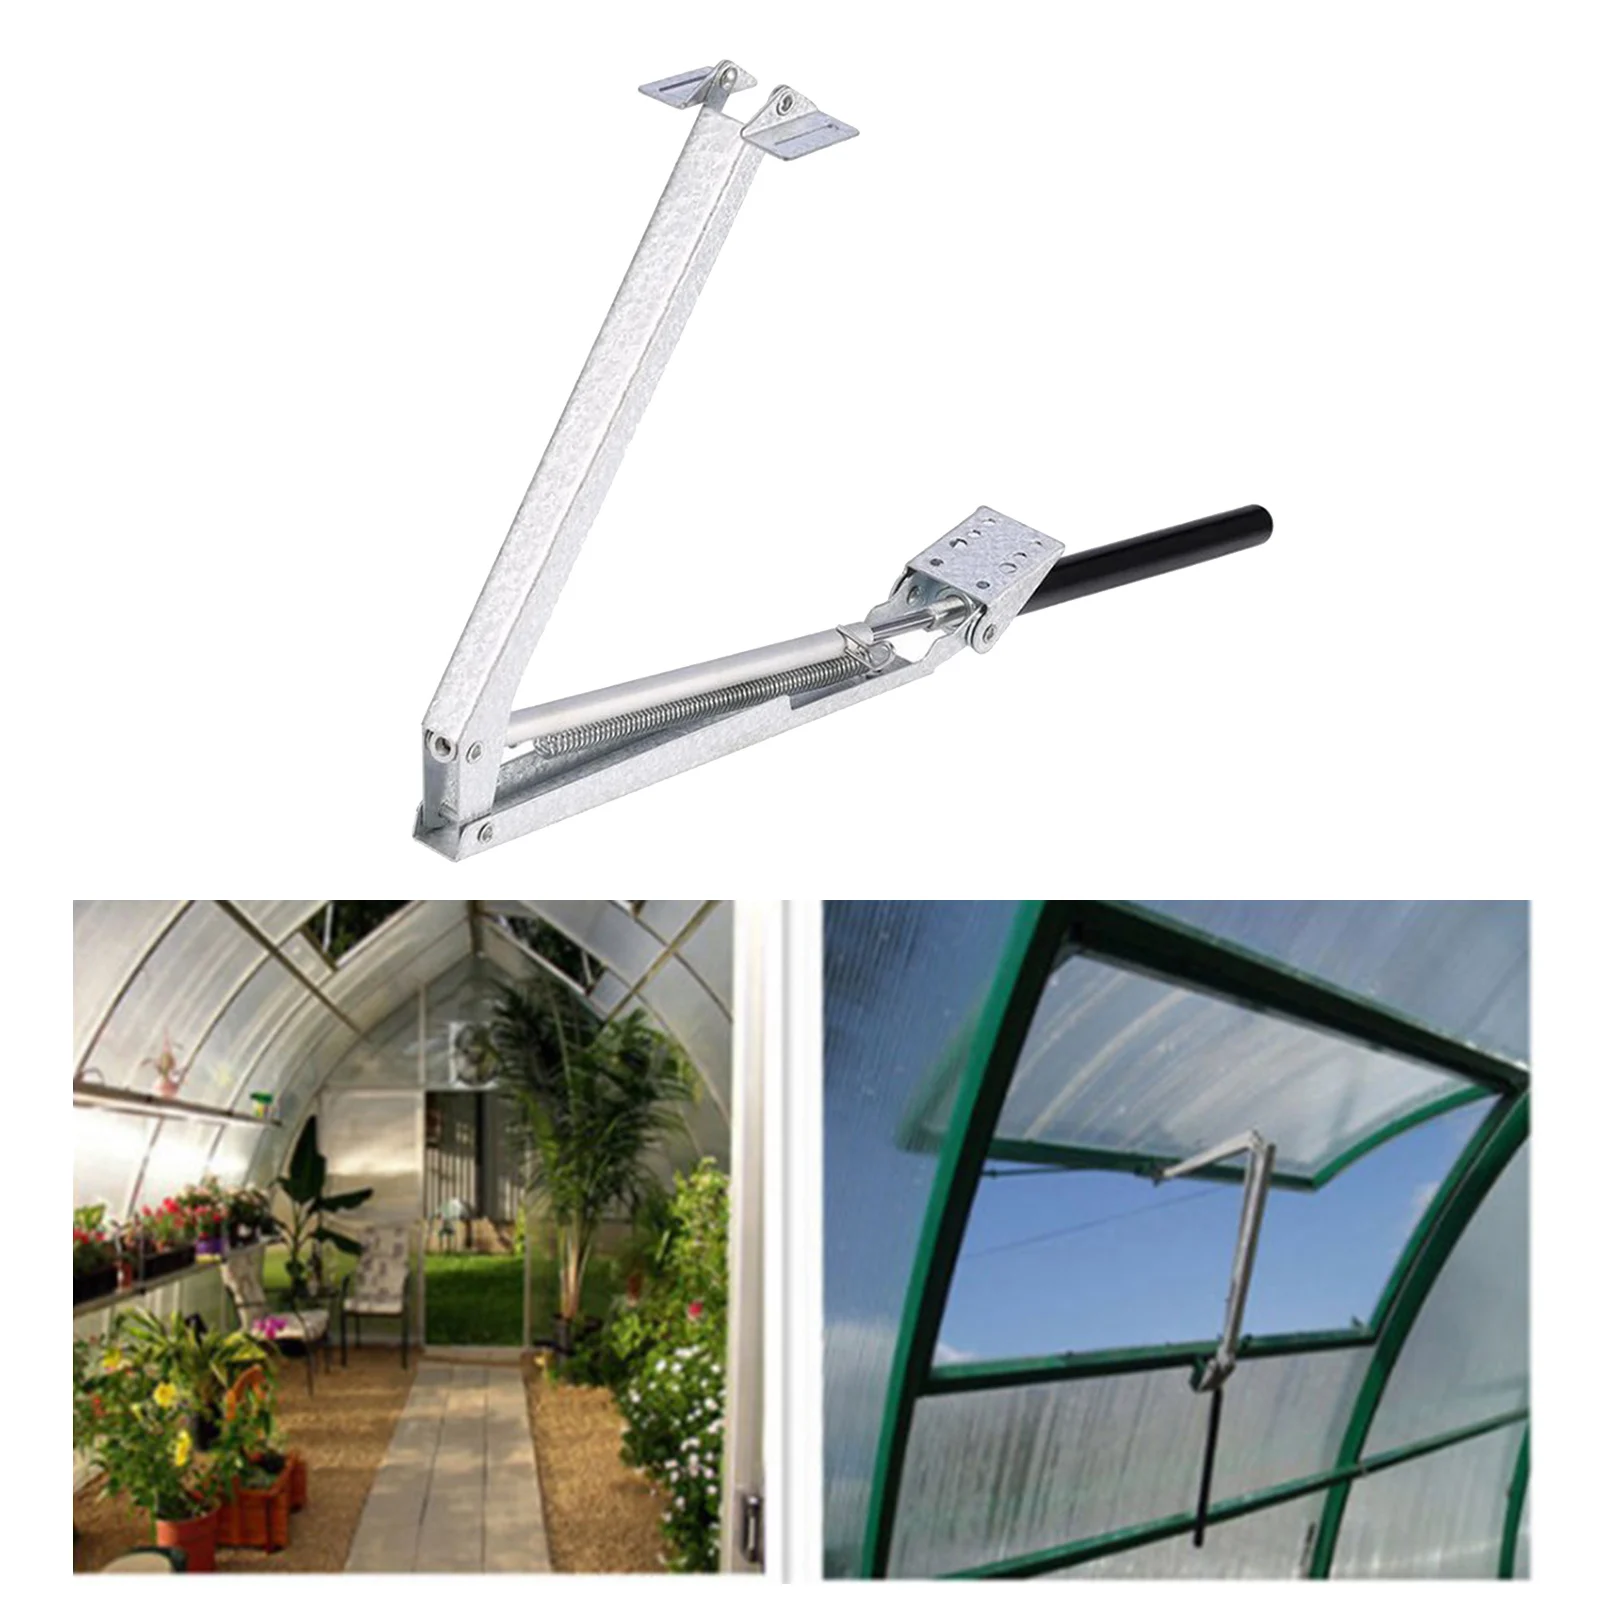 Greenhouse Automatic Window Opener Solar Sensing Vent Sping Opener Load 7kg